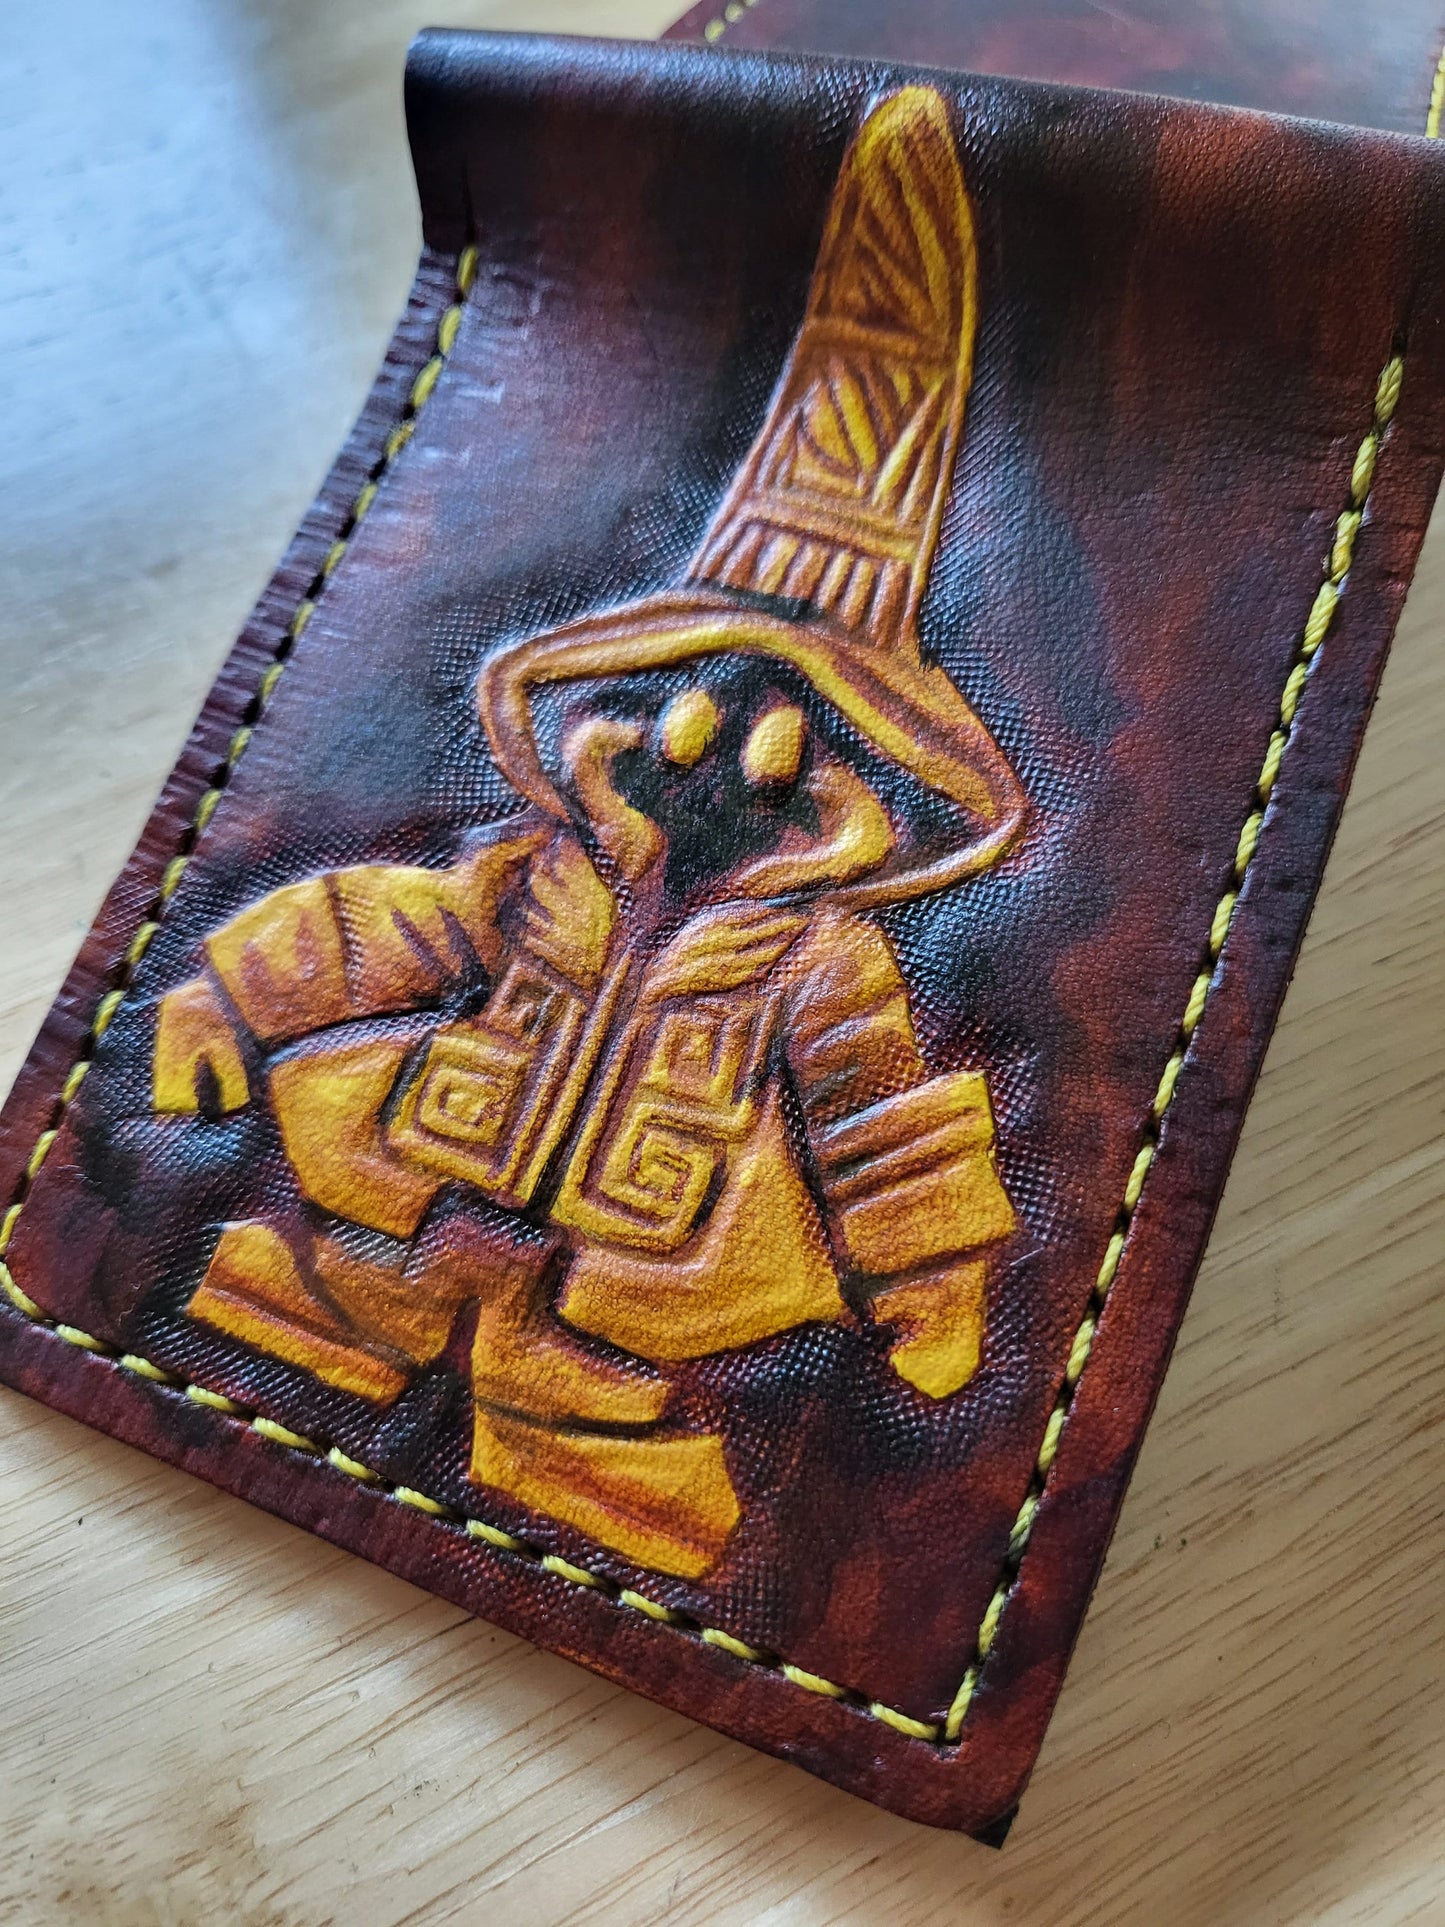 Vivi Ornitier - Leather Bifold Wallet - Handcrafted Final Fantasy inspired Wallet -